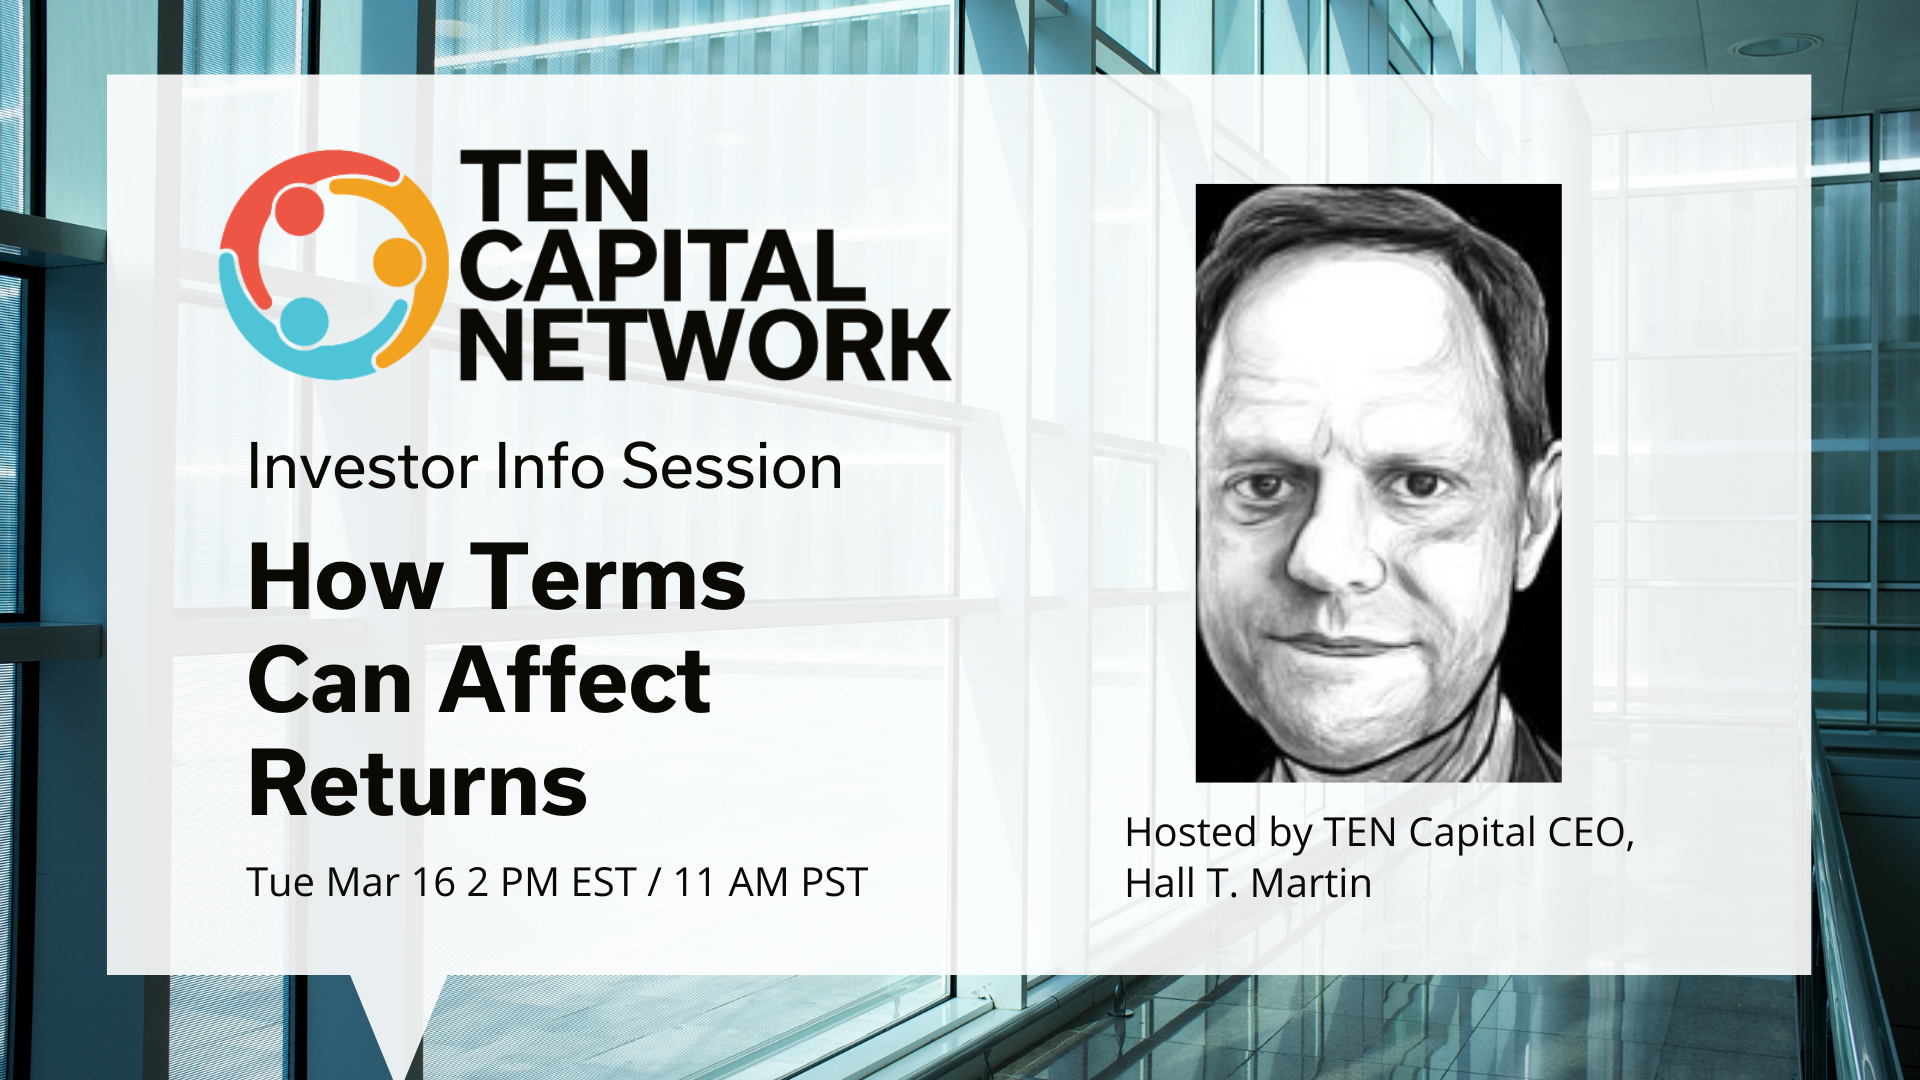 TEN Capital Presents: Investor Info Session - How Terms Can Affect Returns